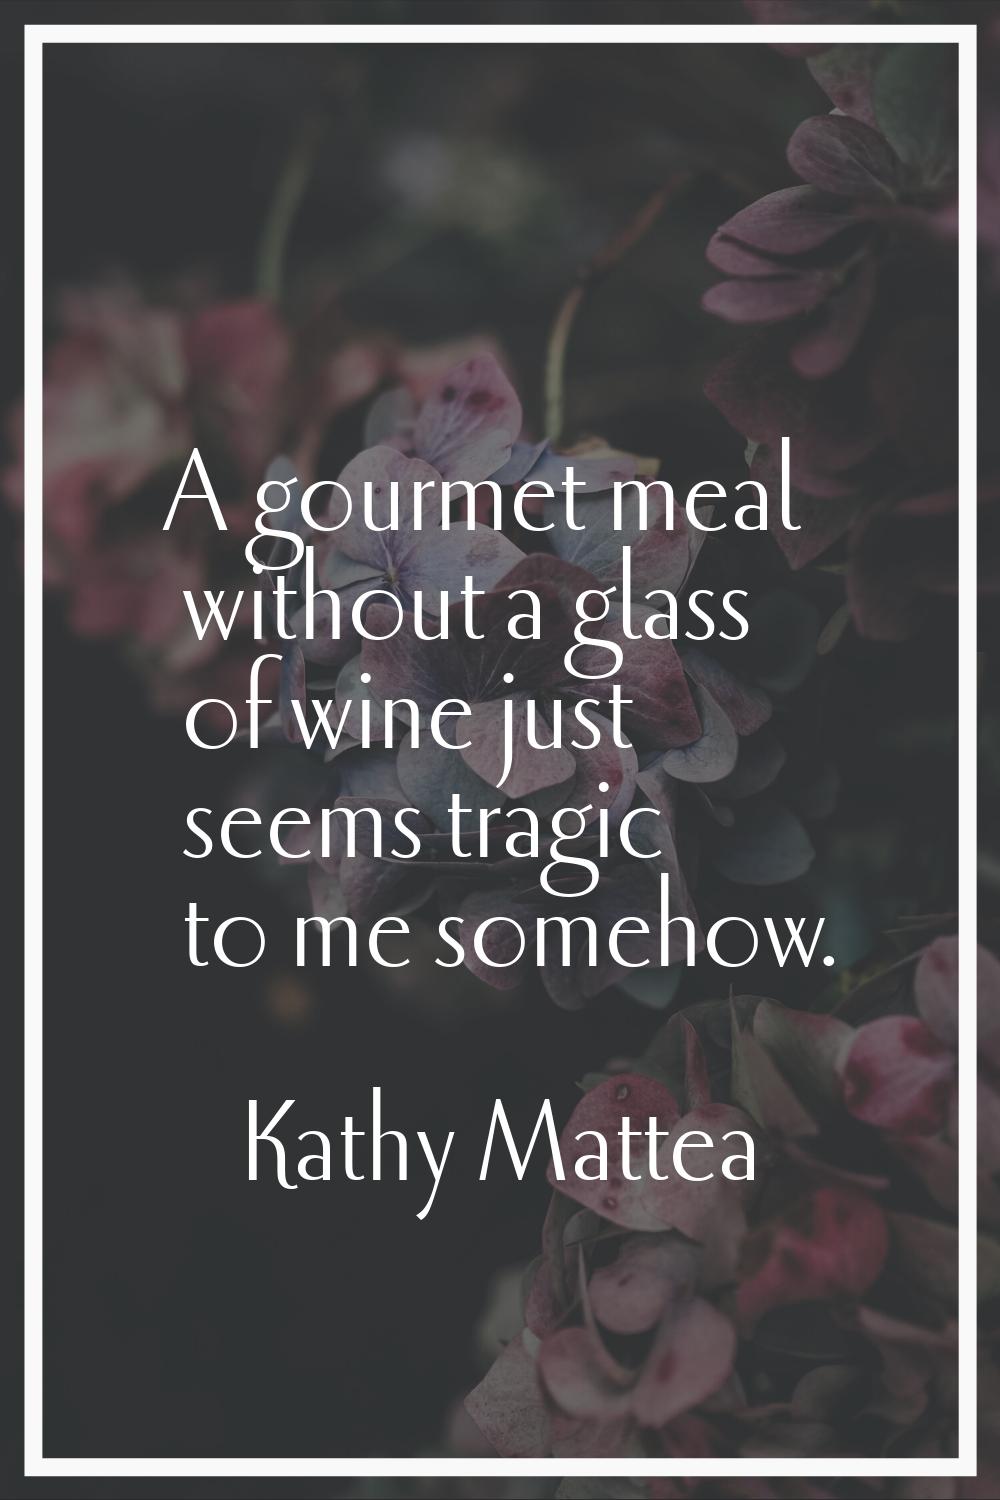 A gourmet meal without a glass of wine just seems tragic to me somehow.